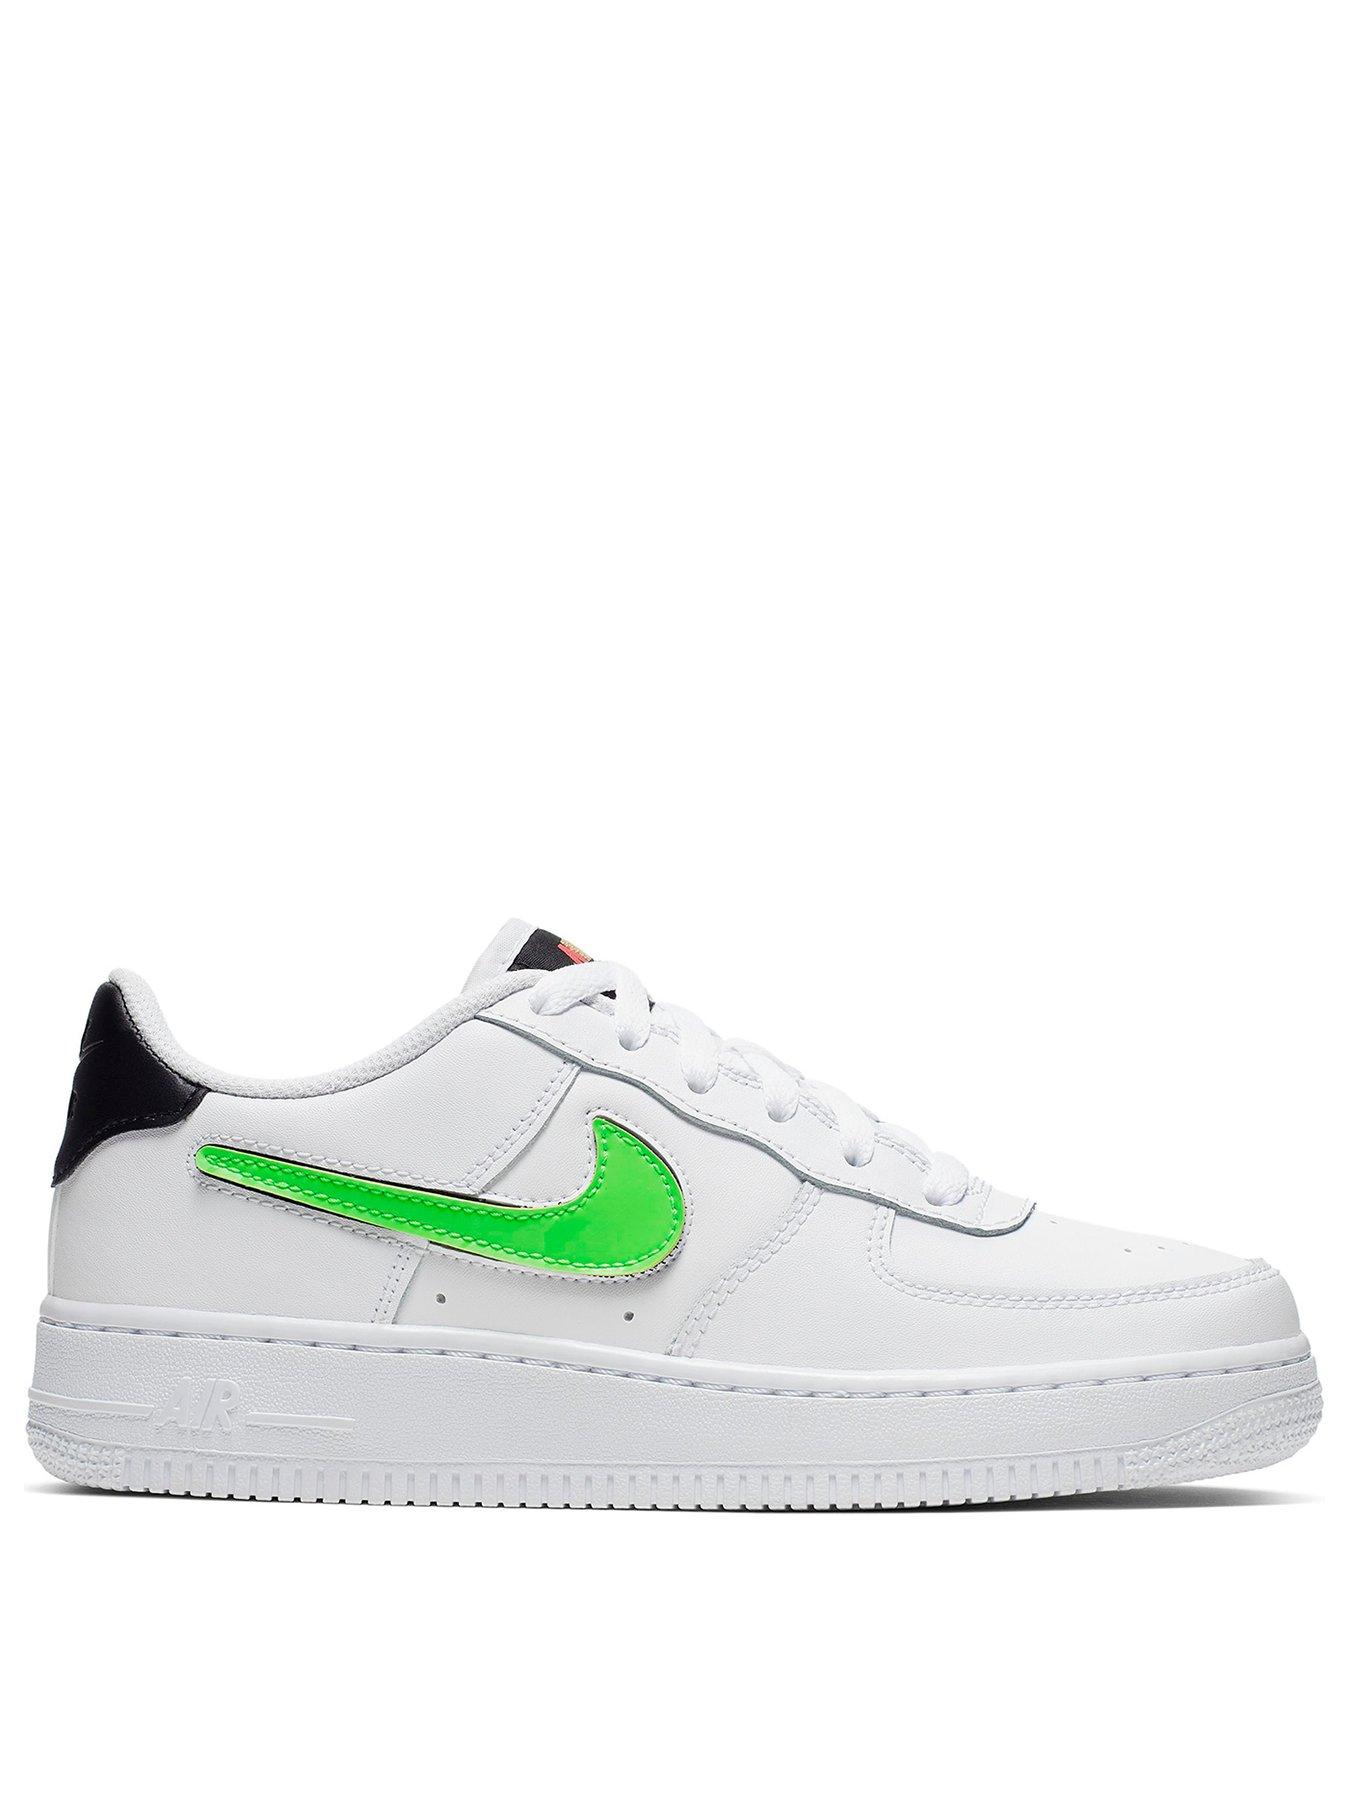 light grey air force 1 lv8 3 trainers junior